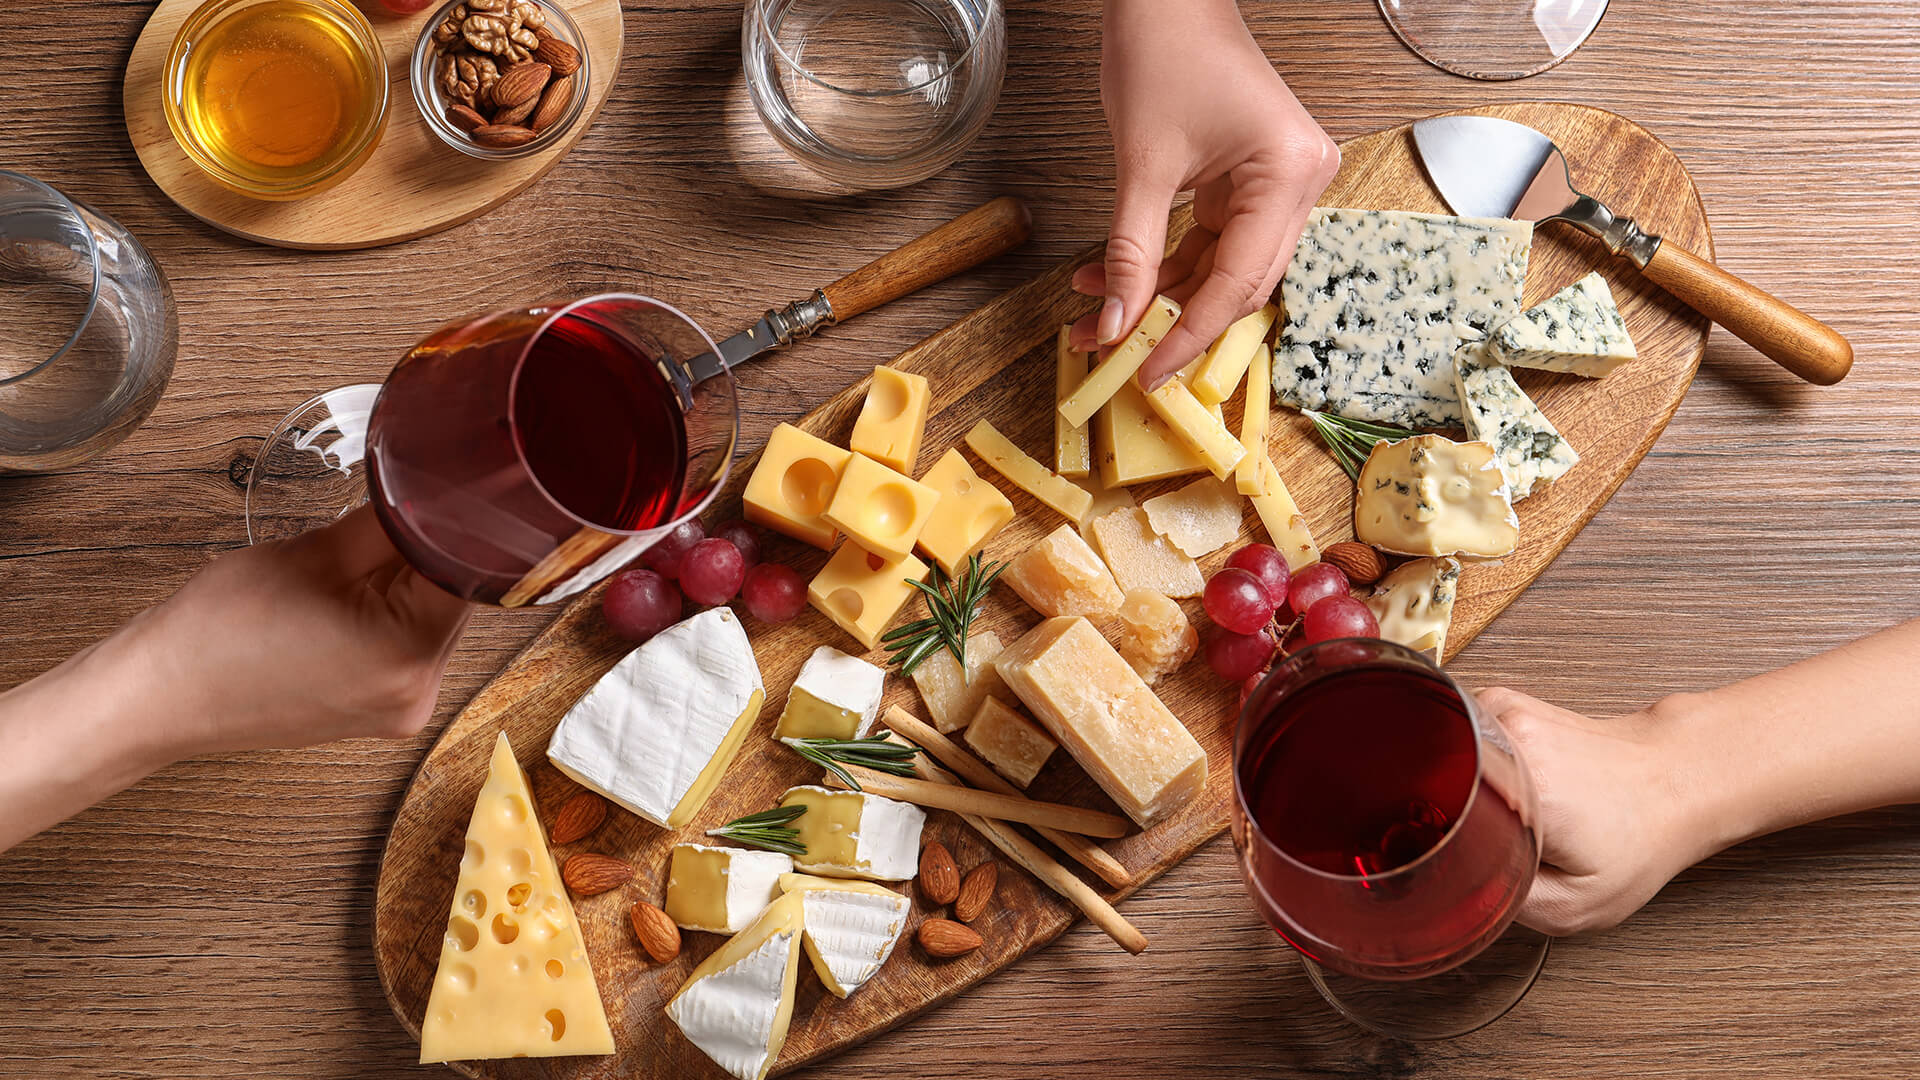 Red wine paired with an elevated cheese board of soft, hard, and aged cheeses. 